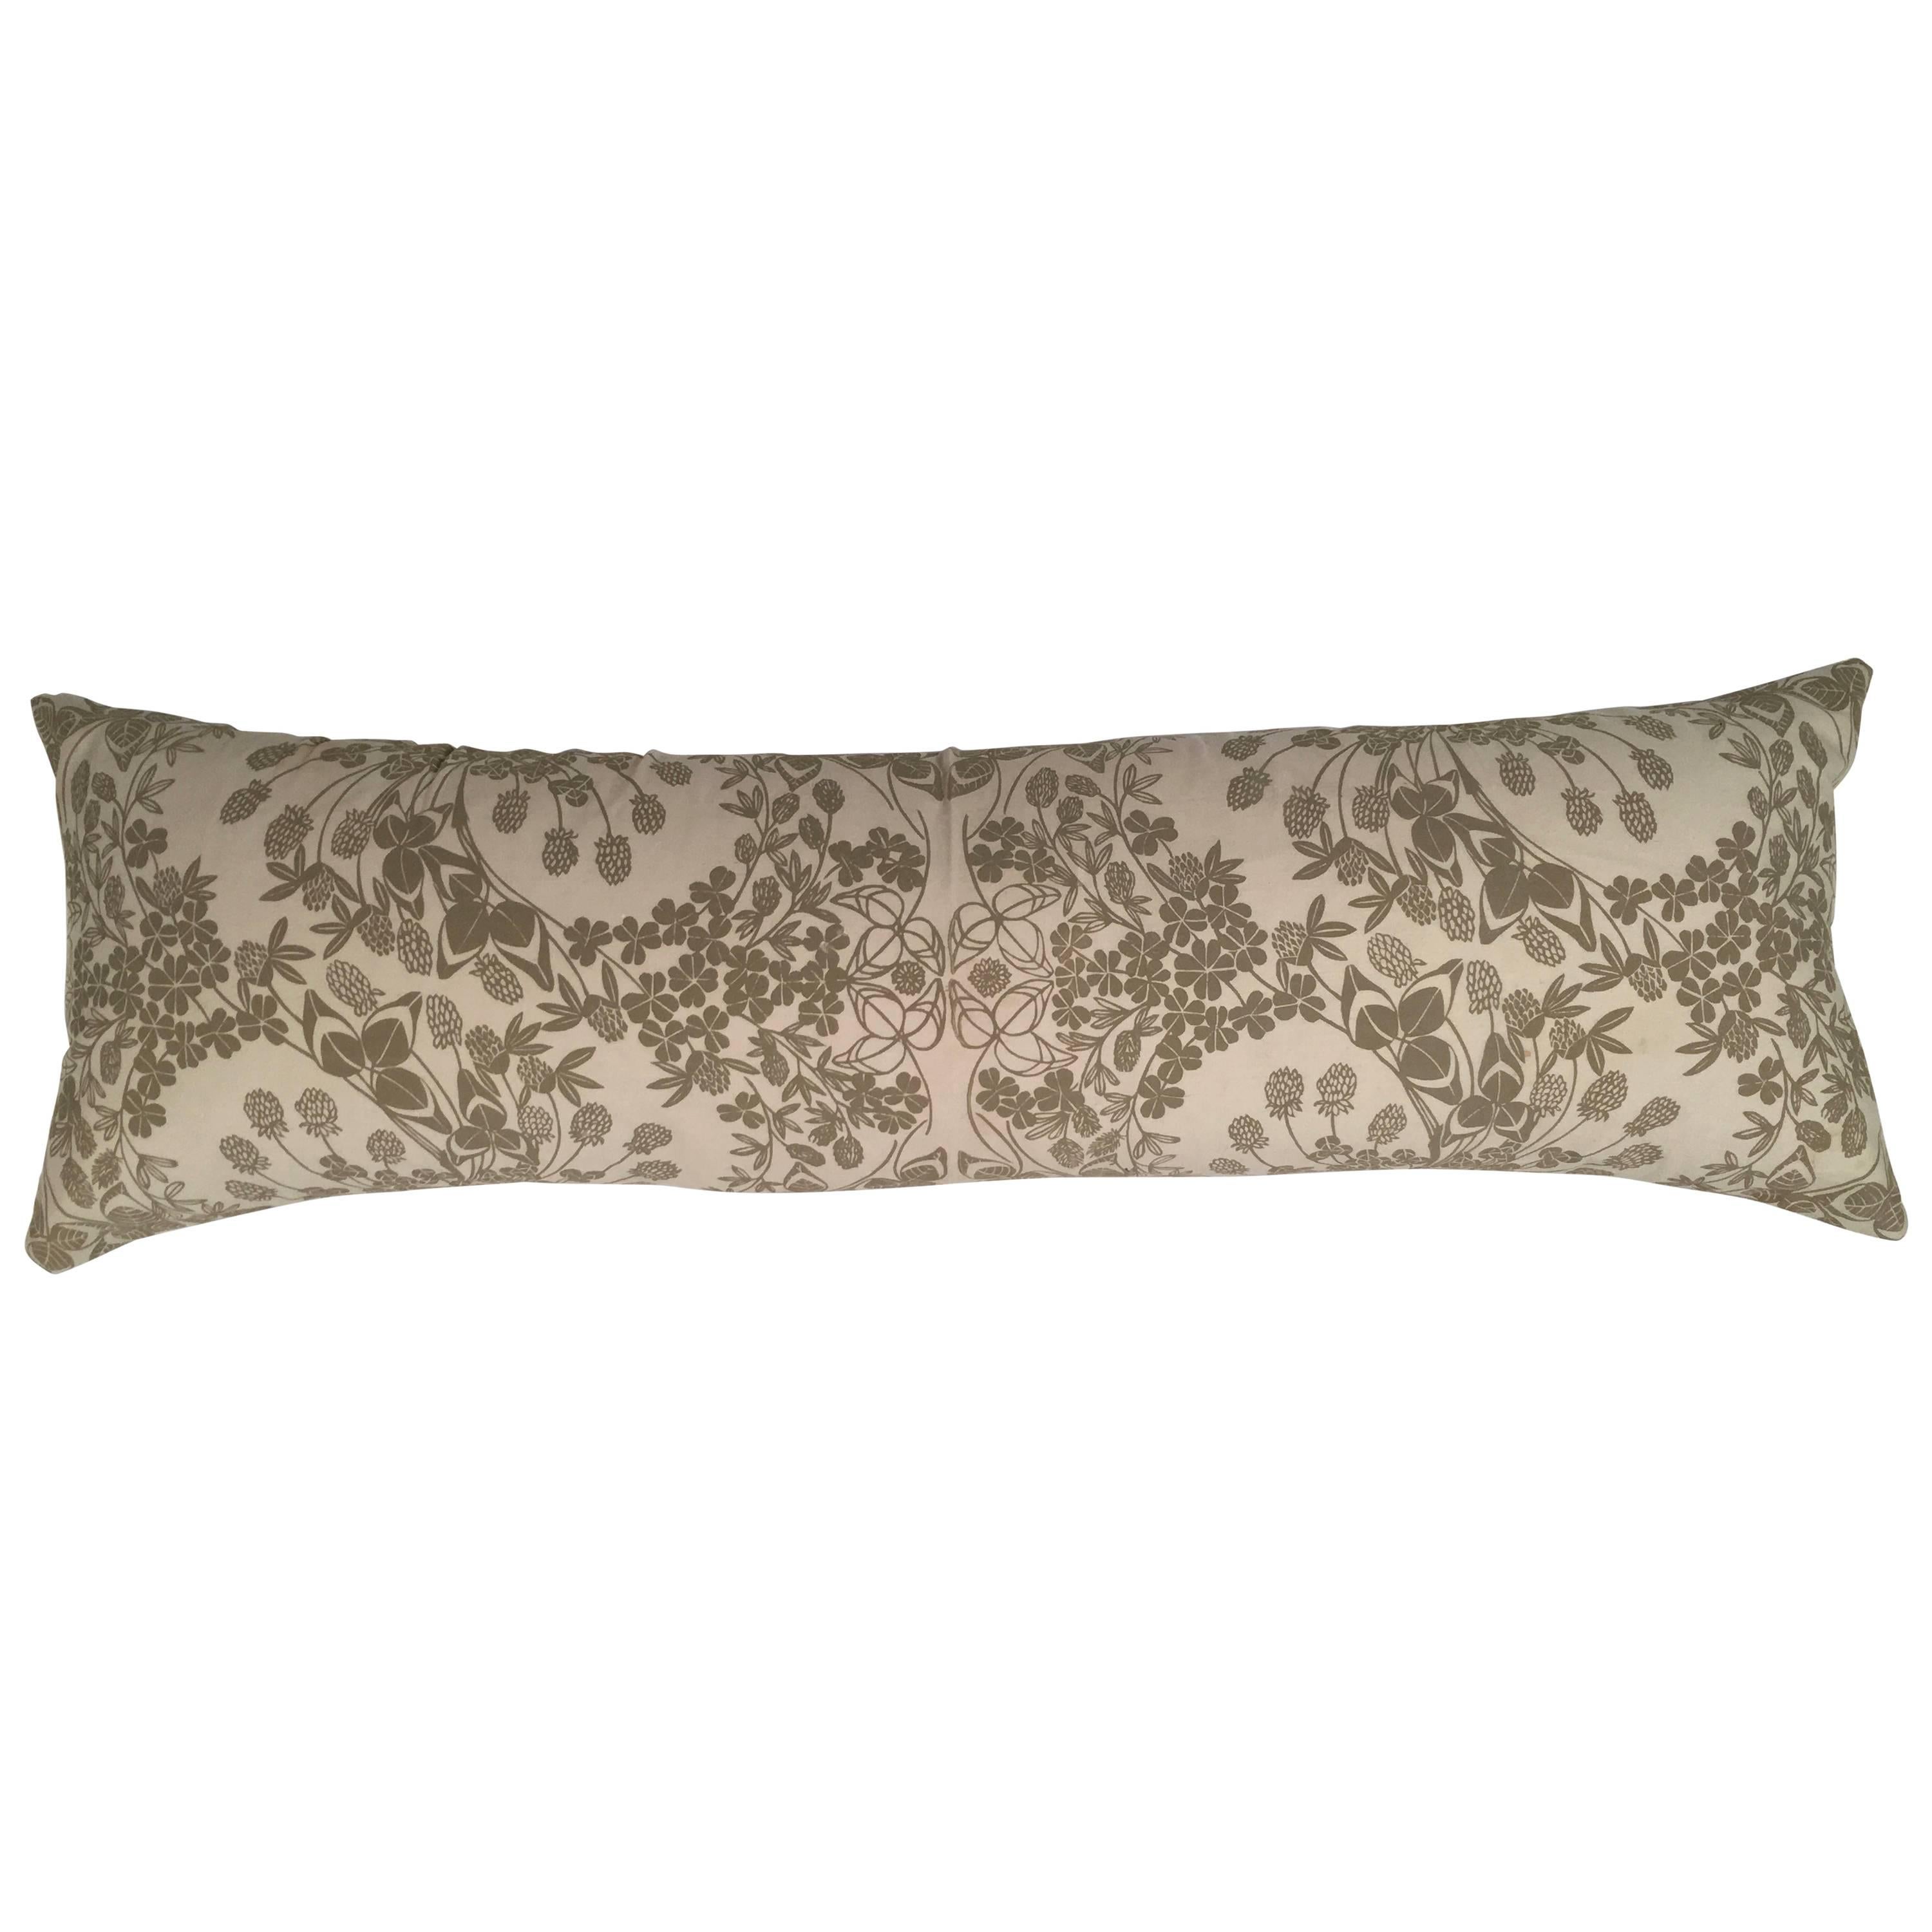 Folly Cove Designers Hand Block Printed Clover Pillow